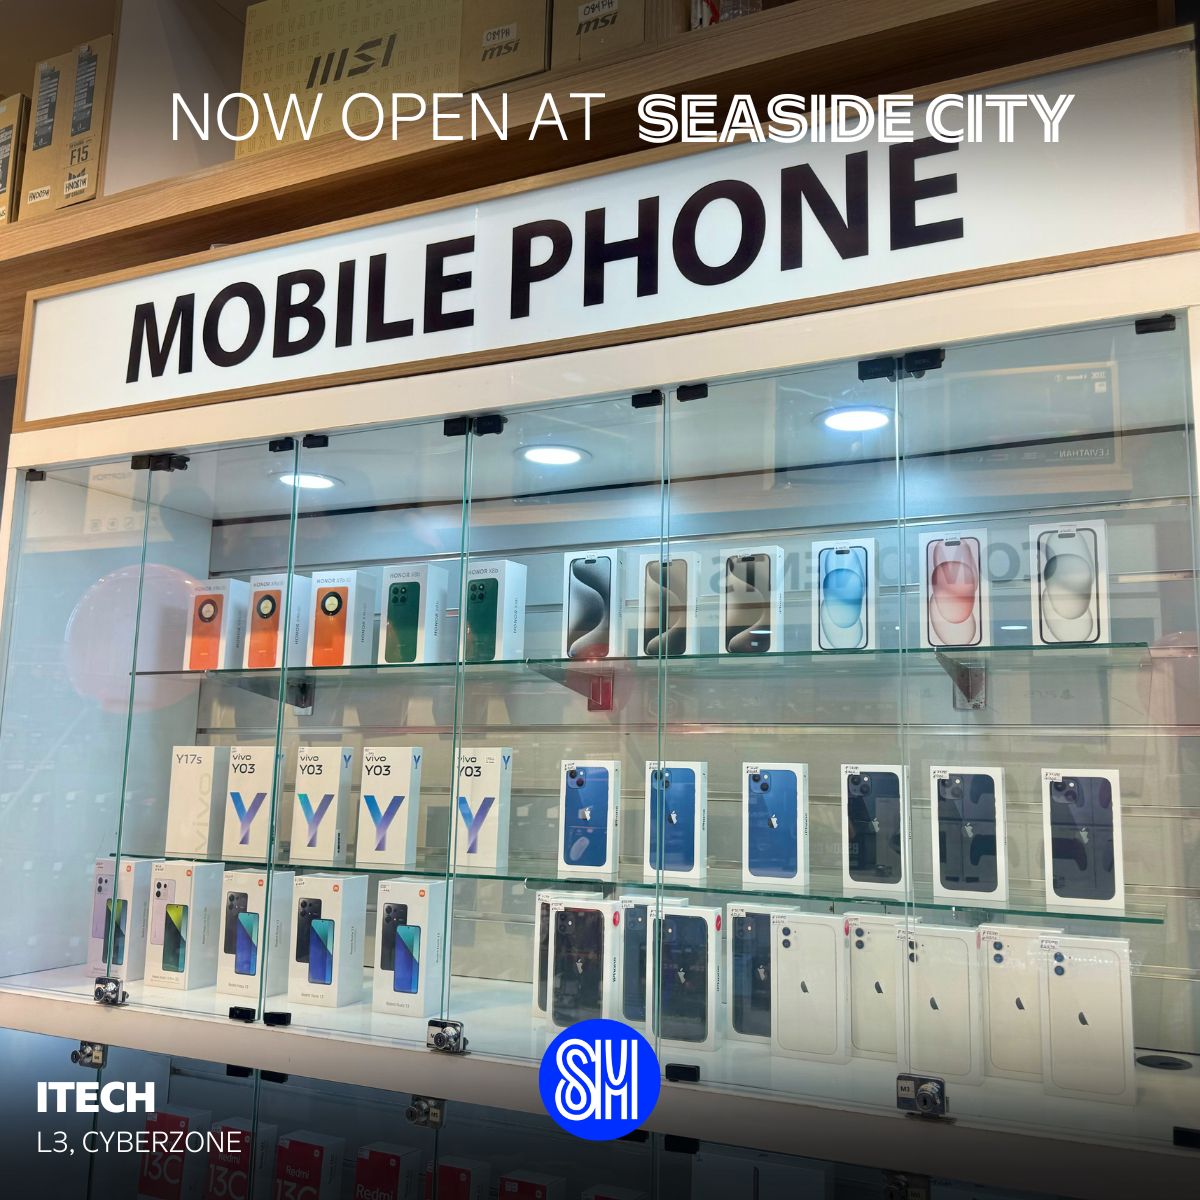 ✨ What's New at Seaside City ✨ ITECH is NOW OPEN! 🤩 Visit them today and experience the convenience and excitement of shopping for gadgets at ITECH. 📱🎮 📍Third Level, Cyberzone #EverythingsHereAtSM #AWorldOfExperienceAtSM